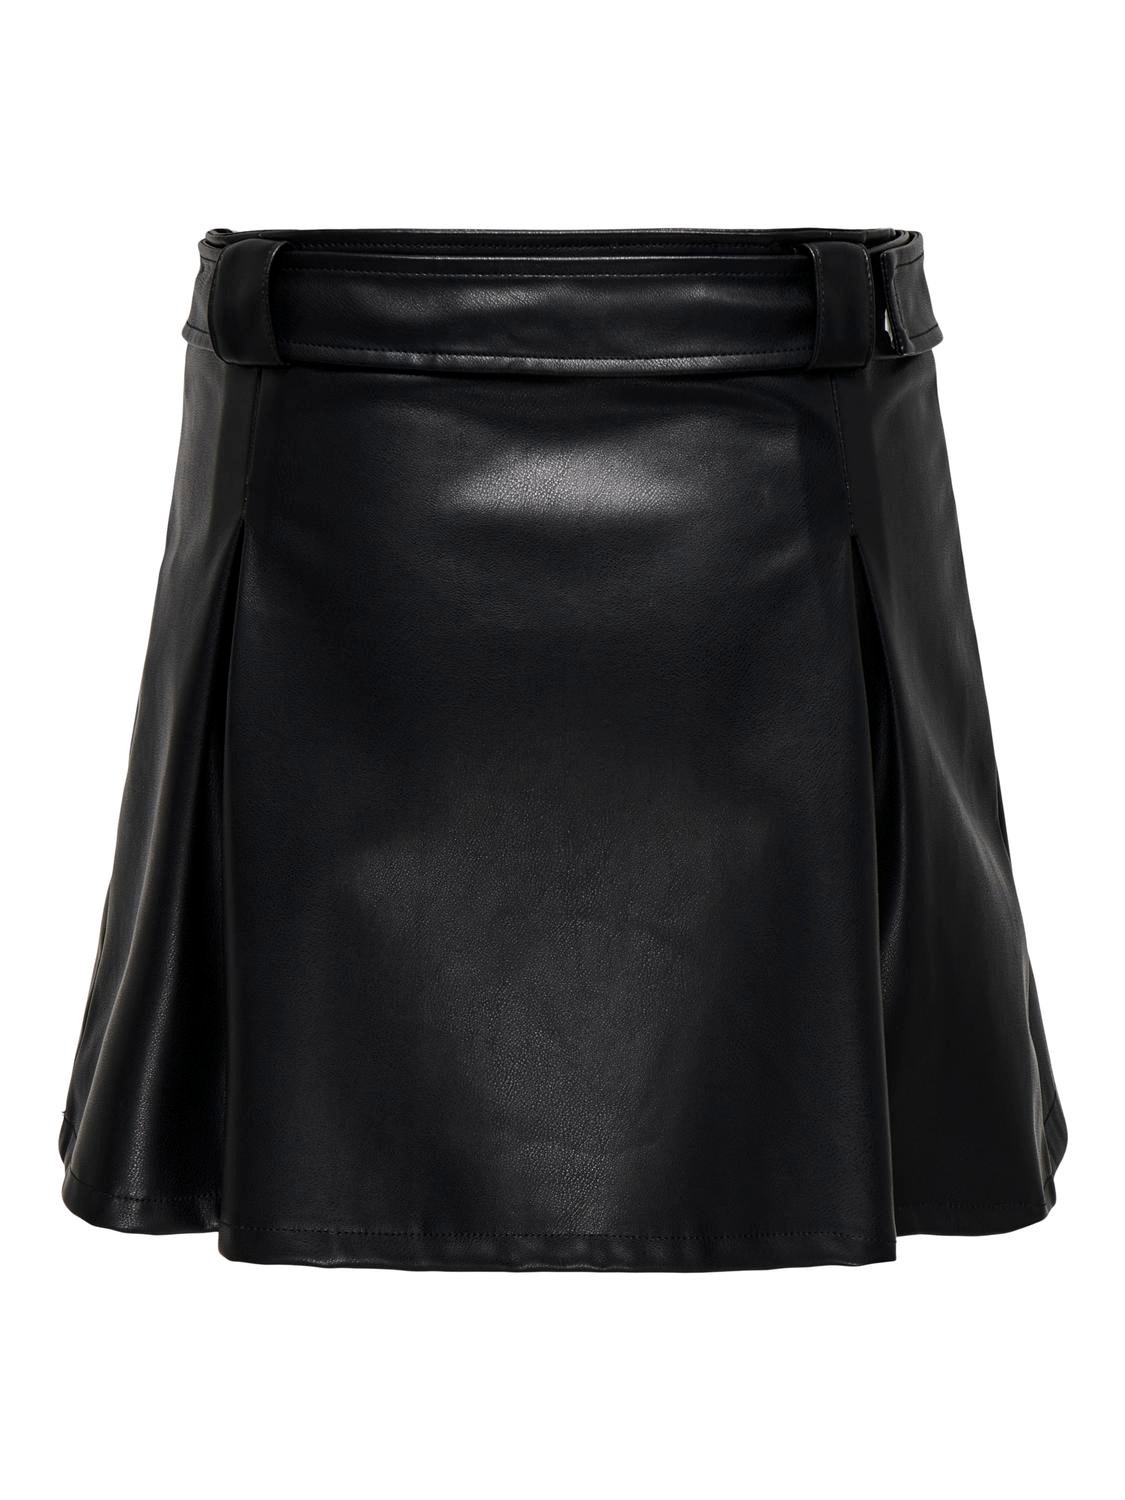 ONLY Faux leather Mini skirt -Black - 15320899